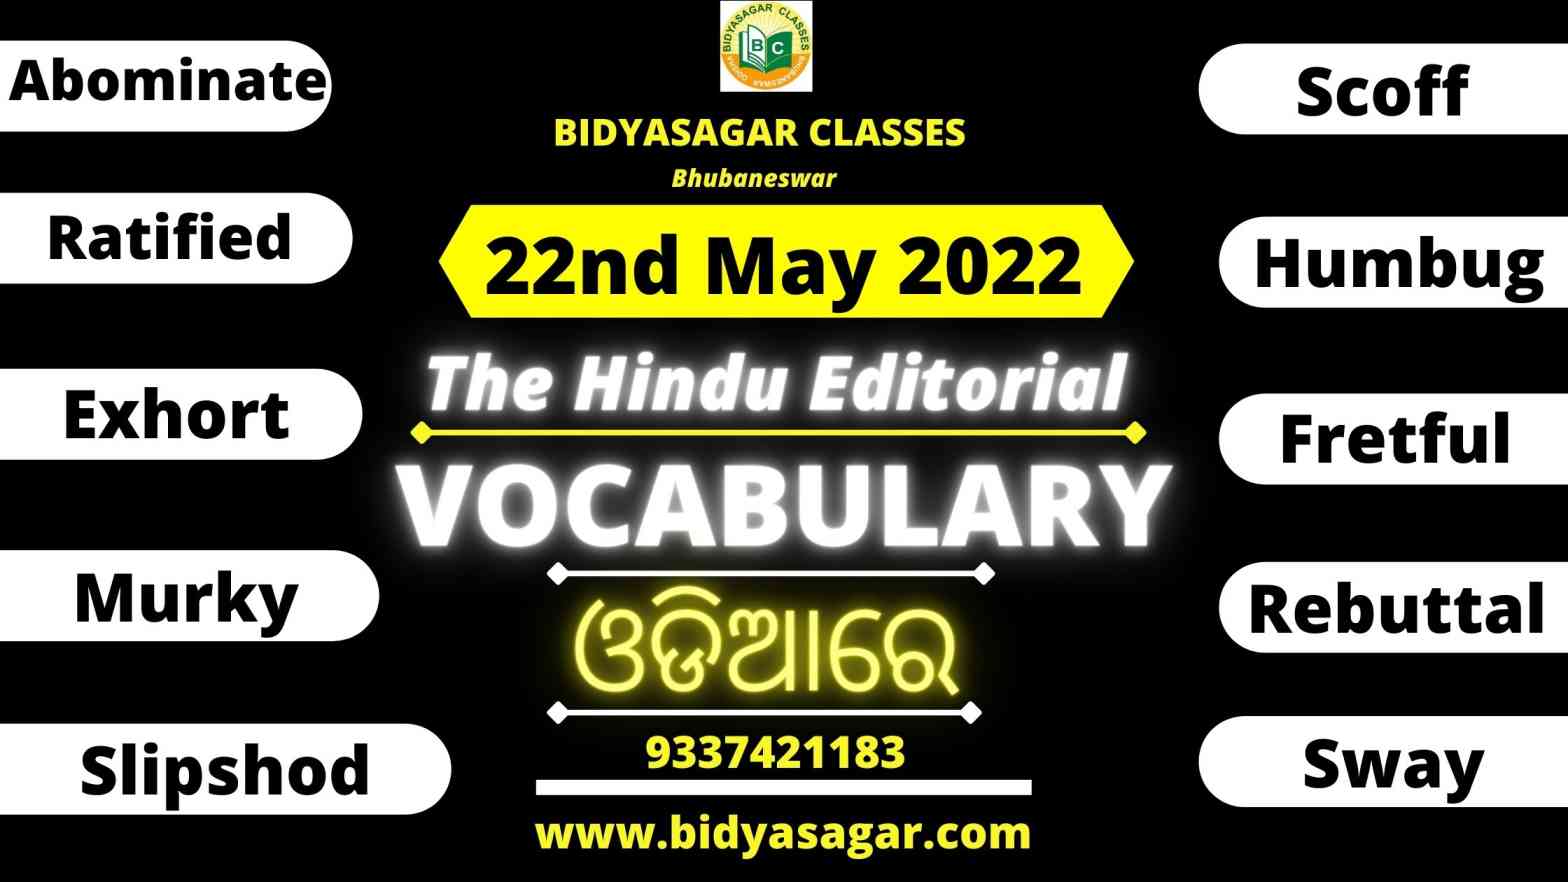 The Hindu Editorial Vocabulary of 22nd May 2022